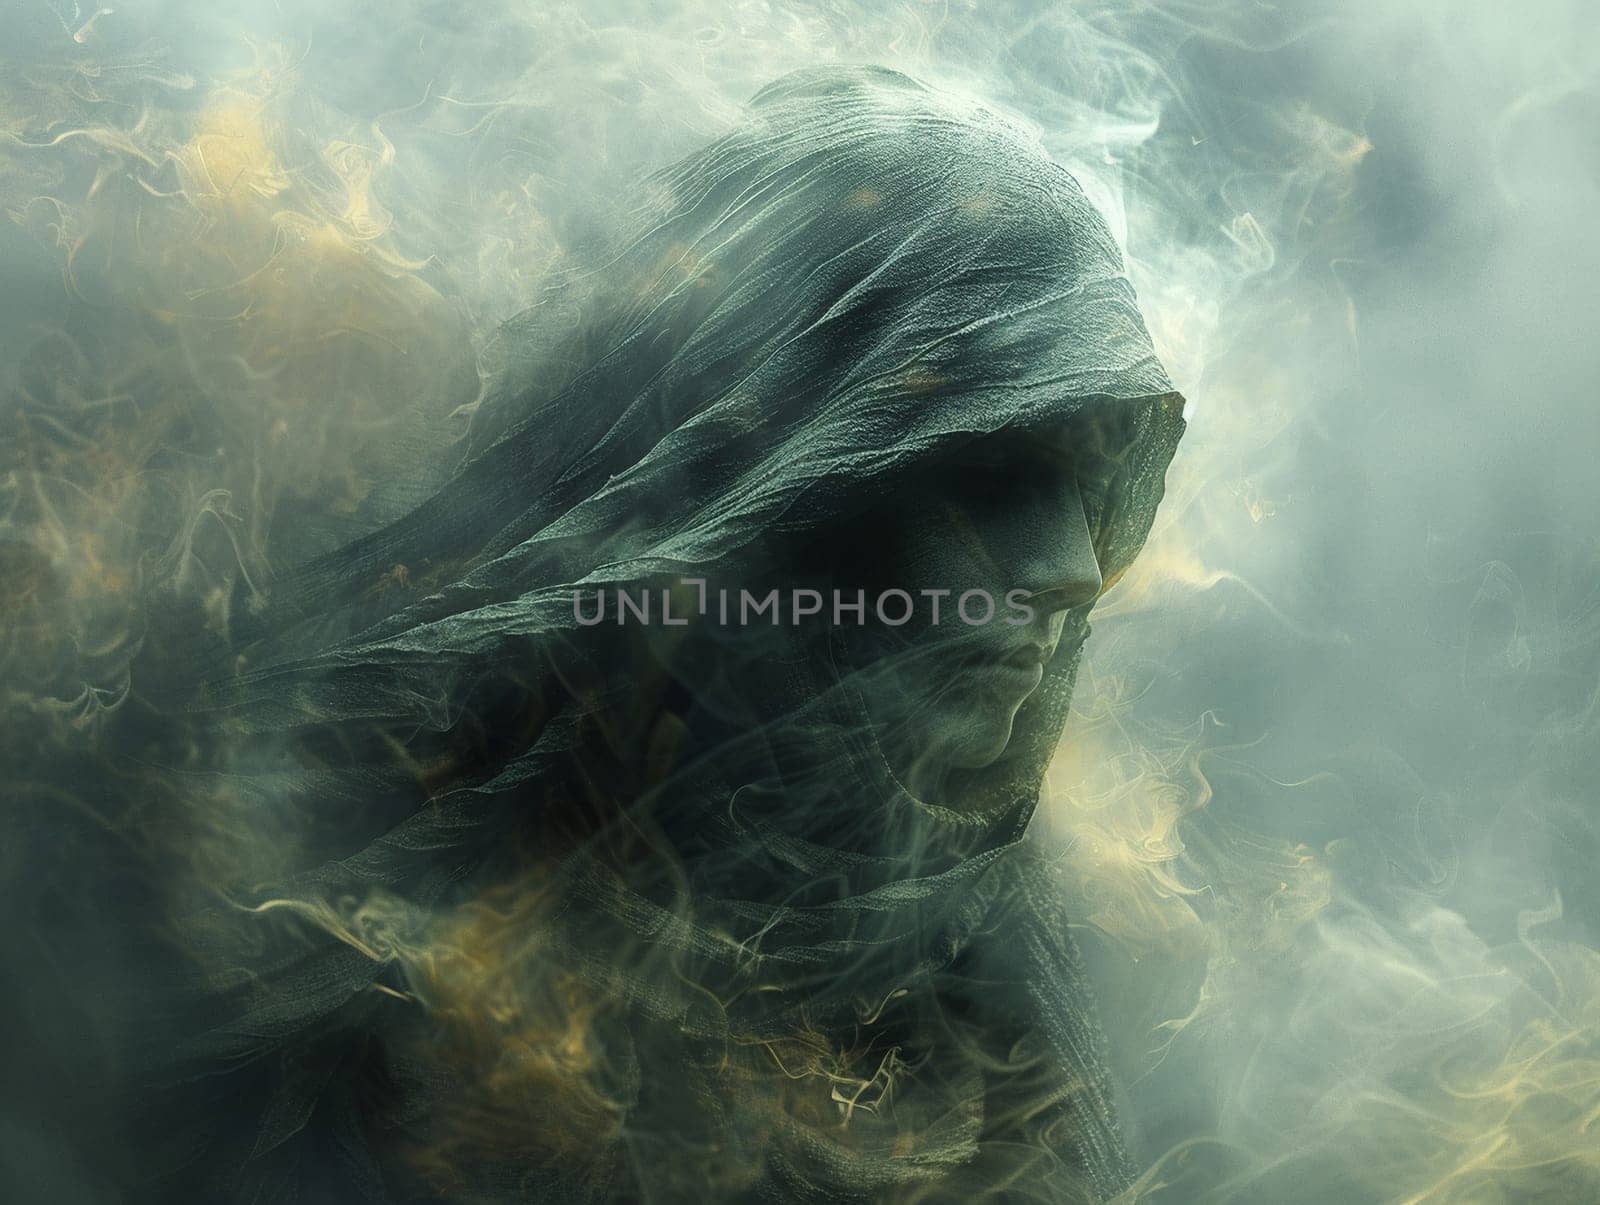 Digital art portrait of a mysterious figure cloaked in shadows, exquisite paintings with a dramatic flair.